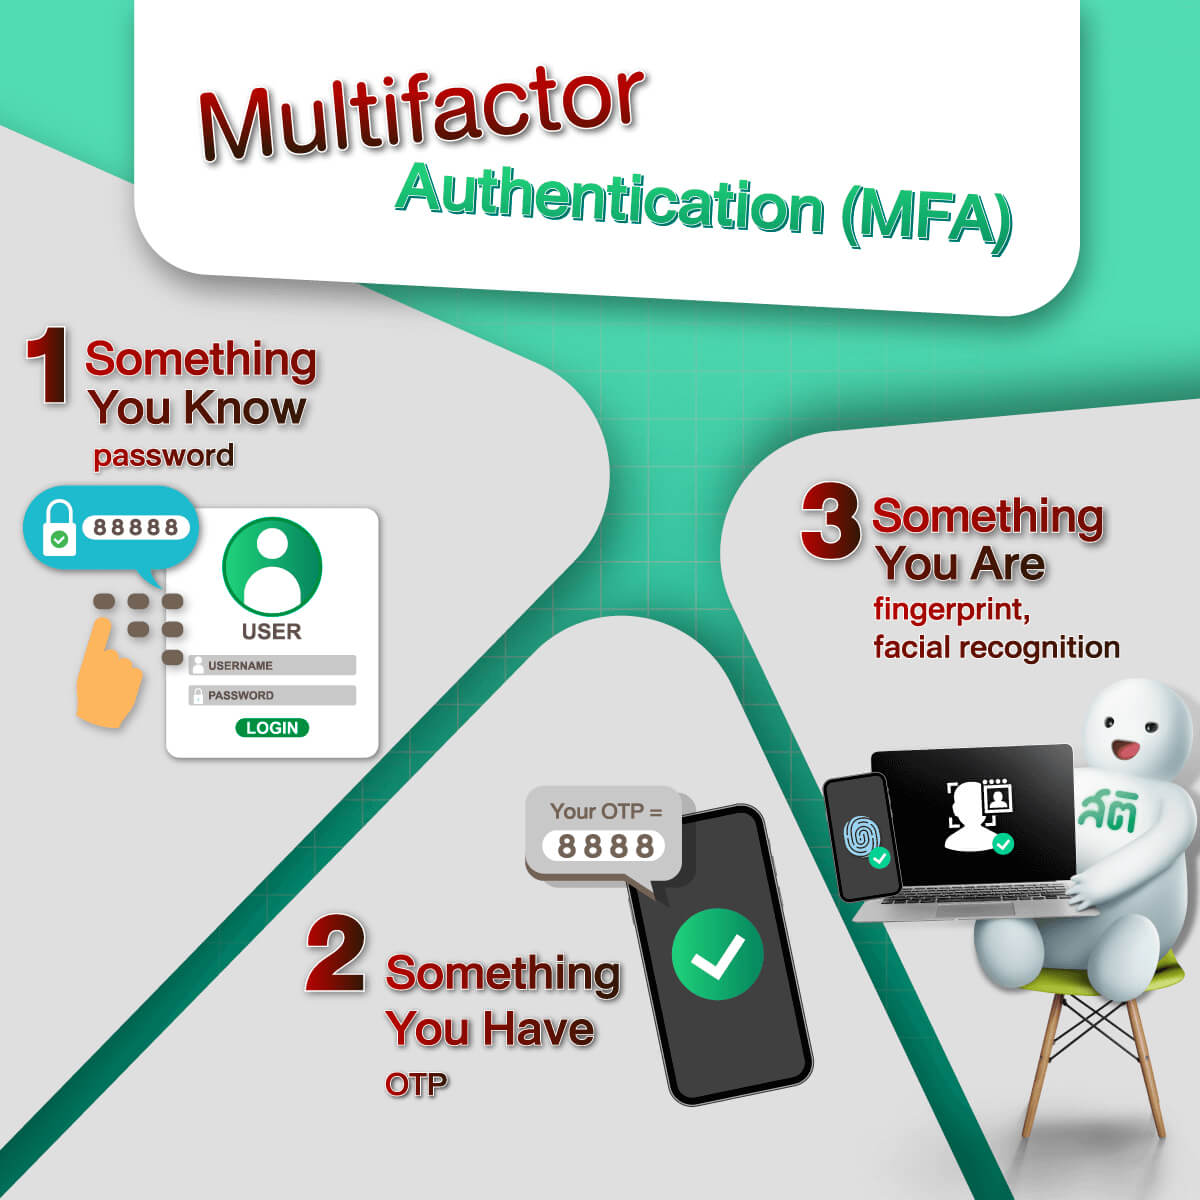 Get to know Multifactor Authentication (MFA)